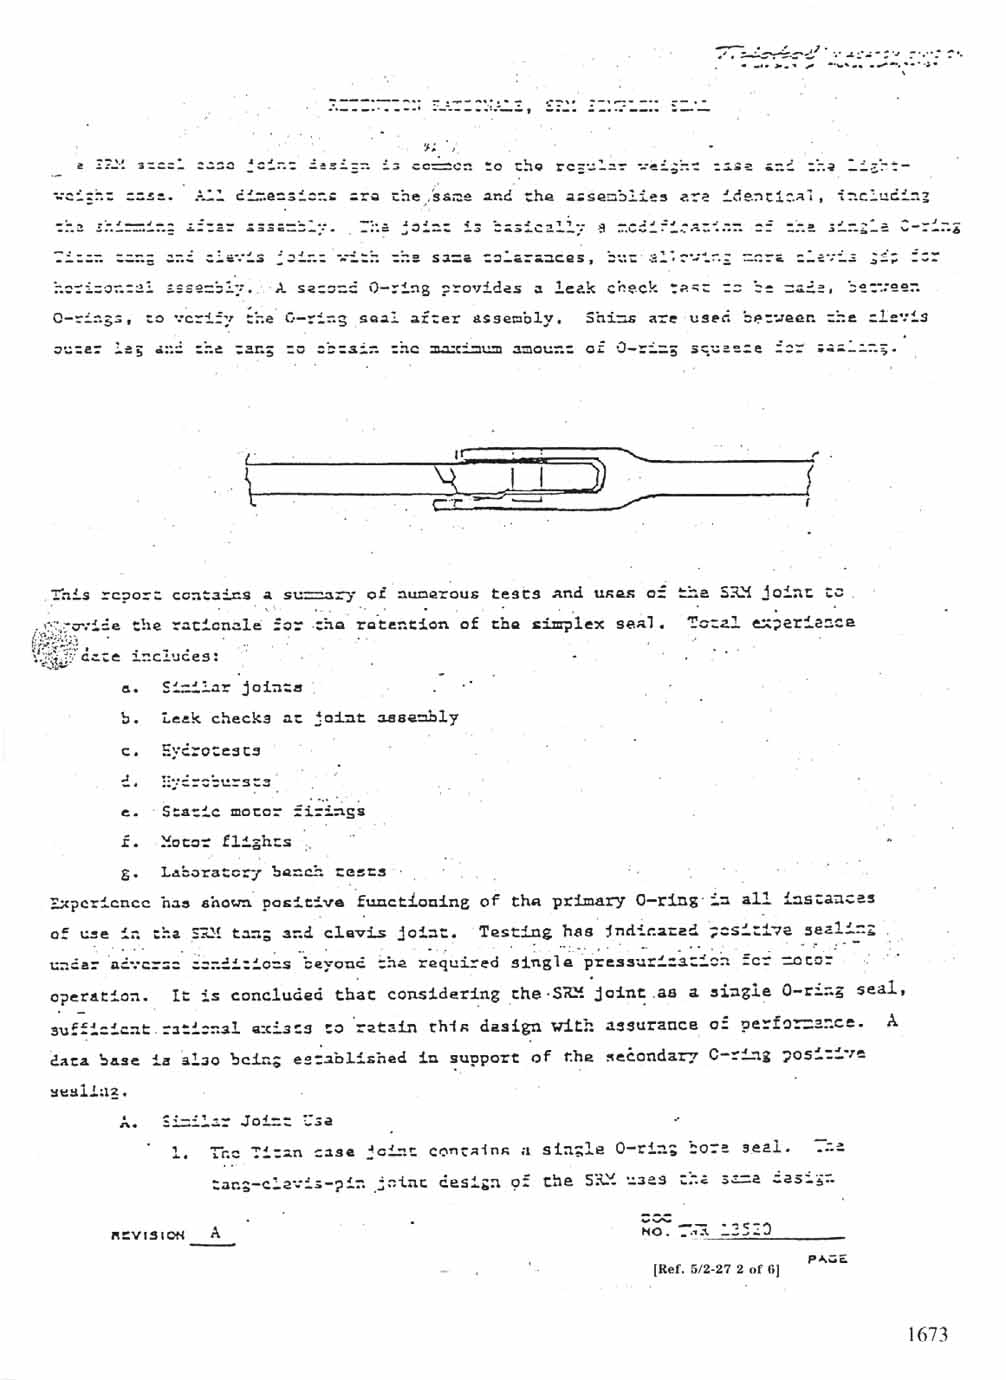 Thiokol's notes on Retention Rationale, SRM Simplex Seal. 1 December 1982. (continued).